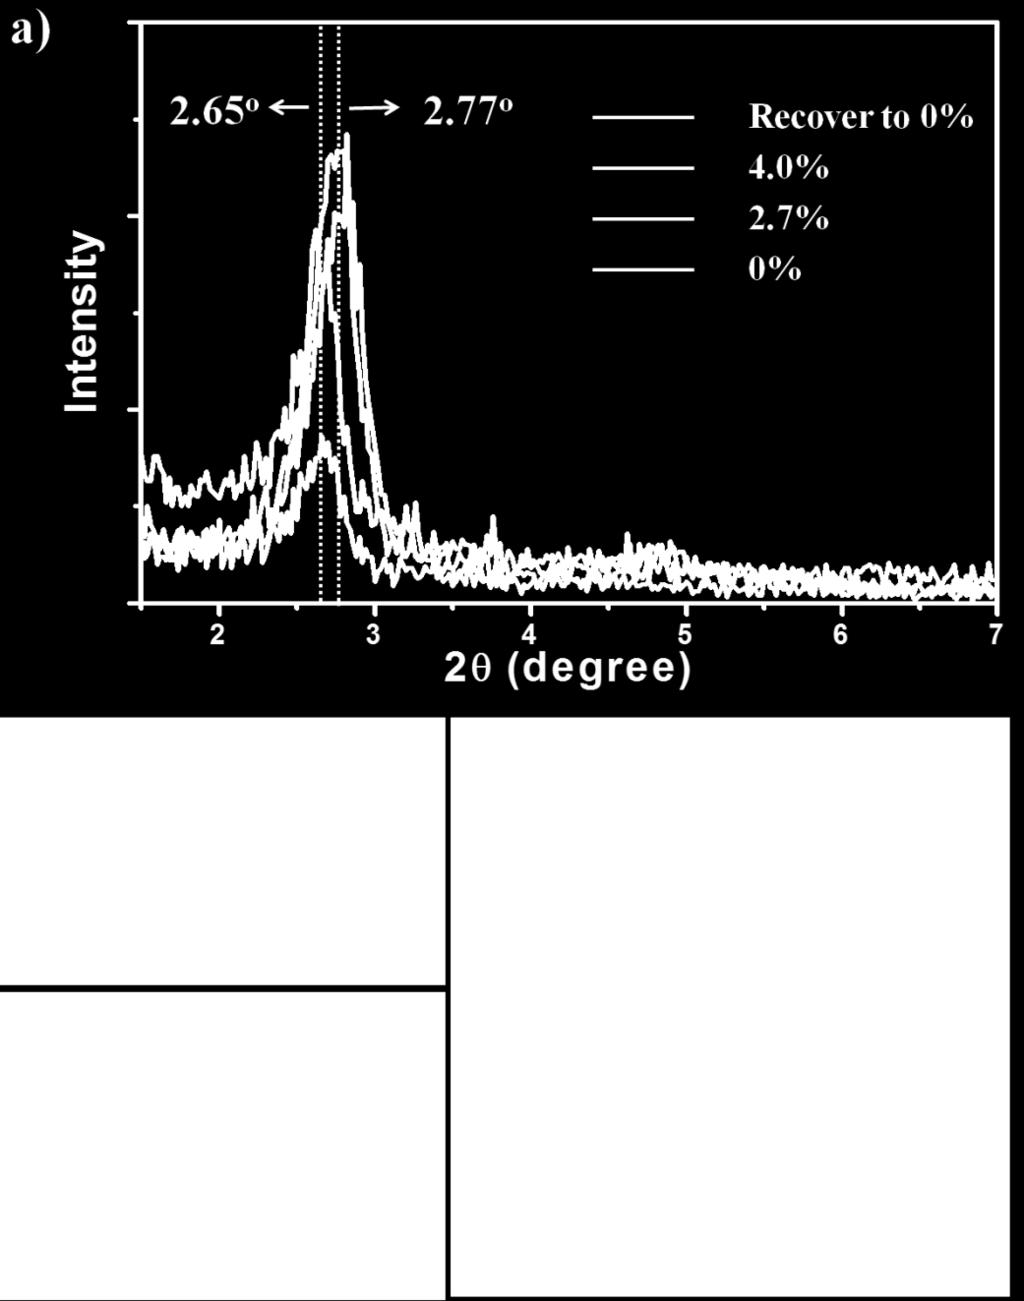 Quantitative strain on the fiber could be introduced through rolling the micrometer on the right side of the stage. At initial stage, i.e. 0% strain, a diffraction peak locating at 2θ=2.